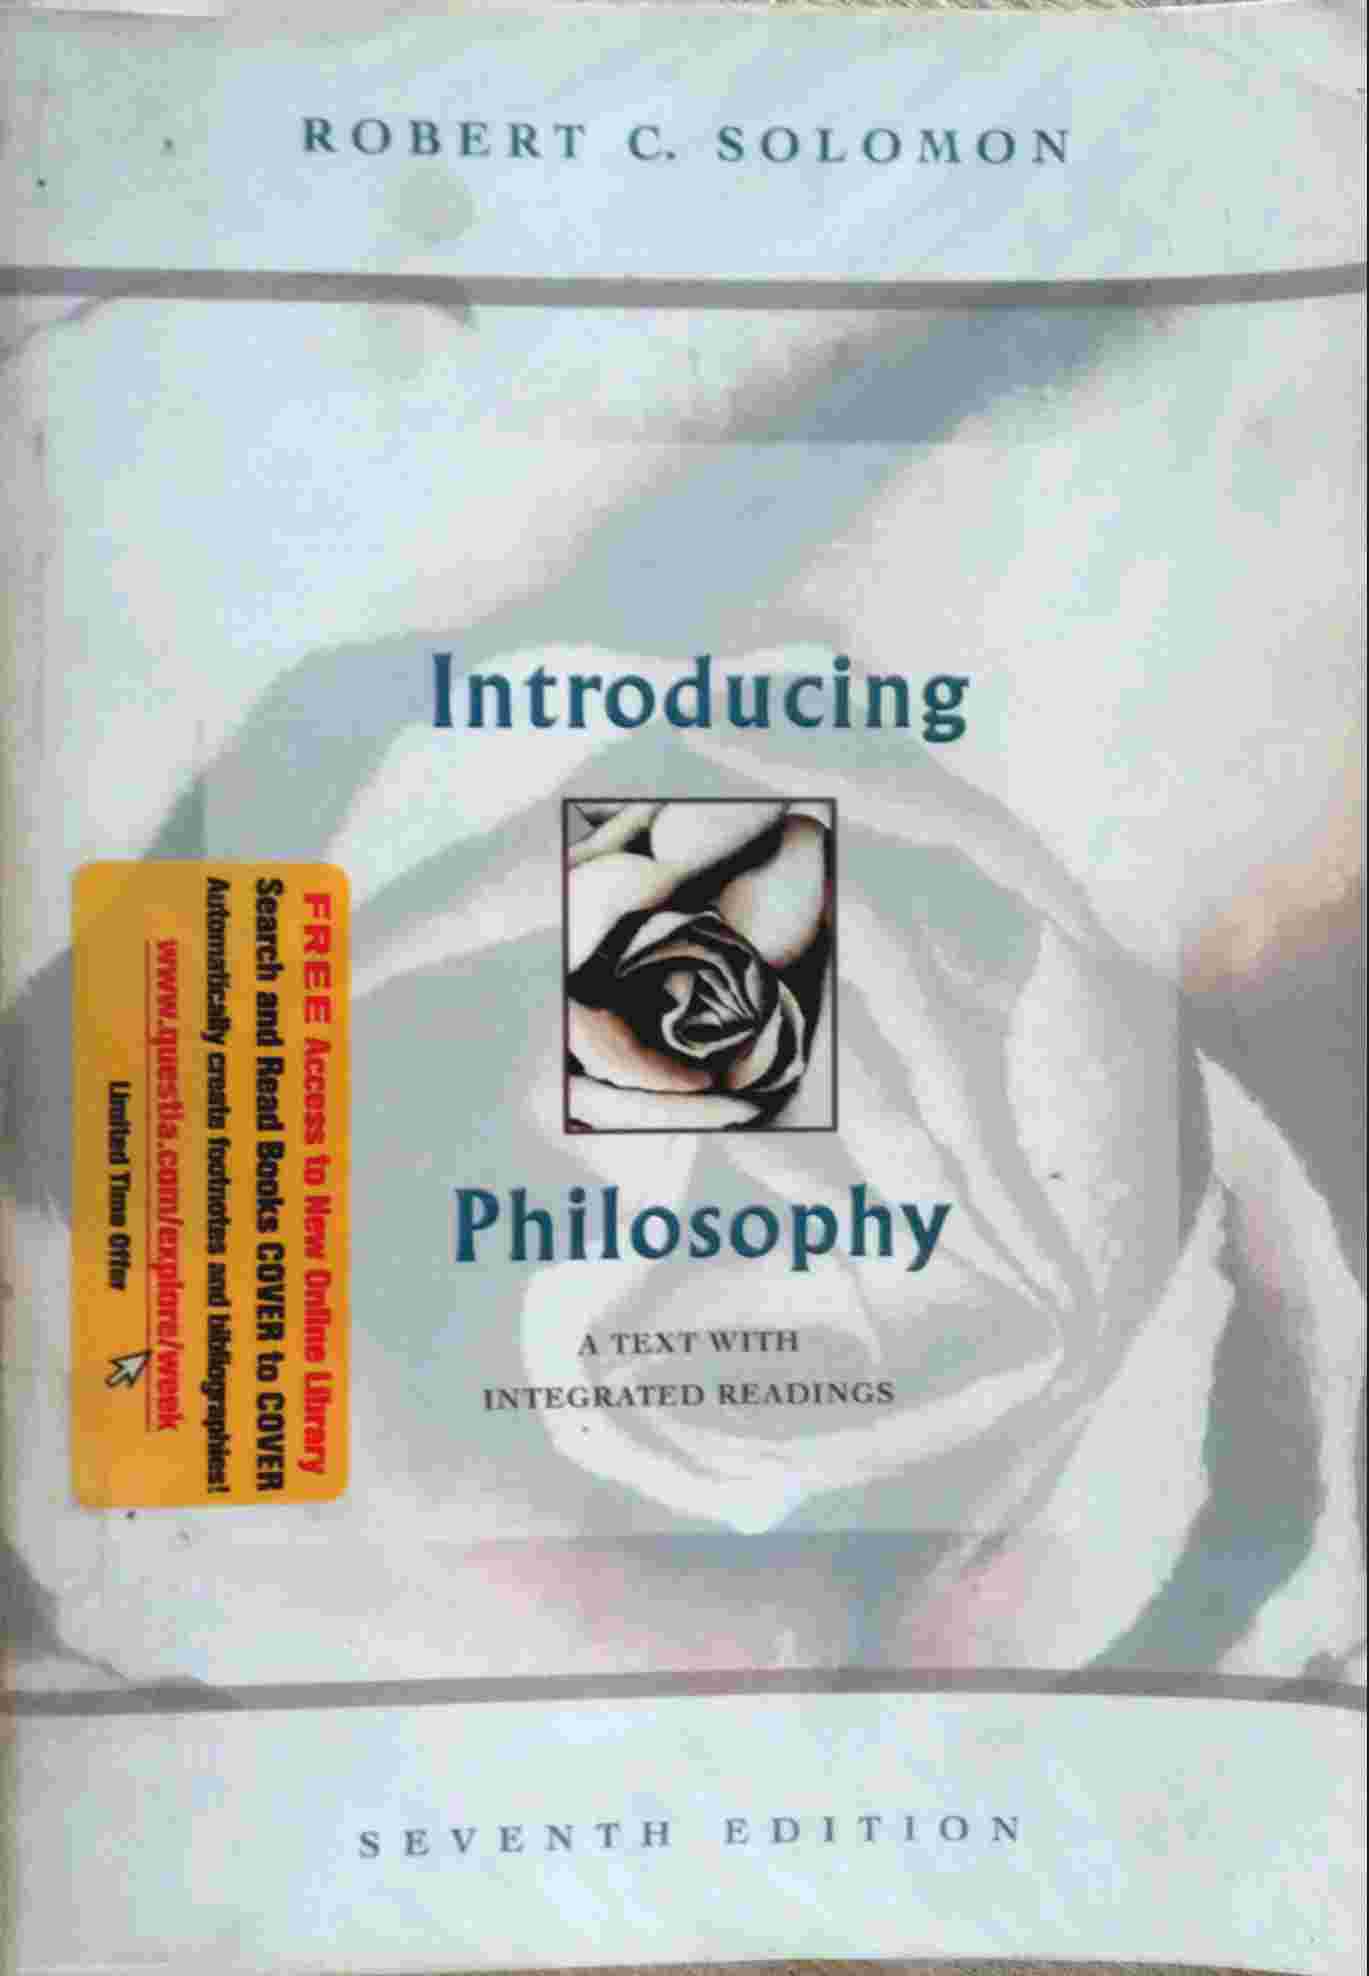 INTRODUCTION TO PHILOSOPHY: A TEXT WITH INTEGRATED READINGS